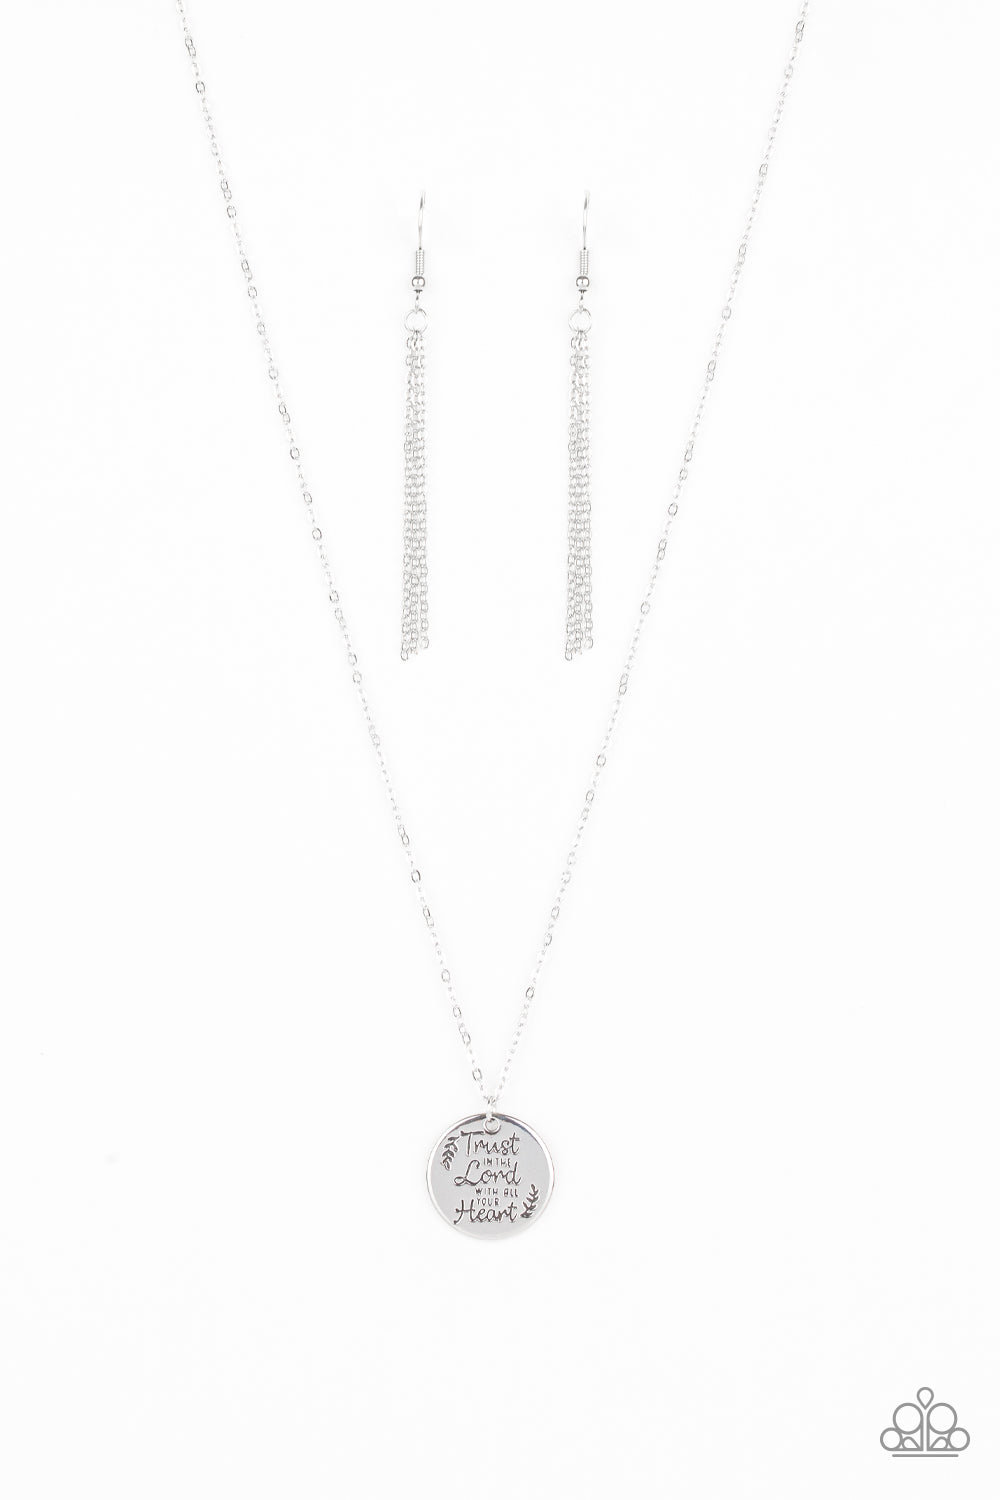 ALL YOU NEED IS TRUST - SILVER NECKLACE